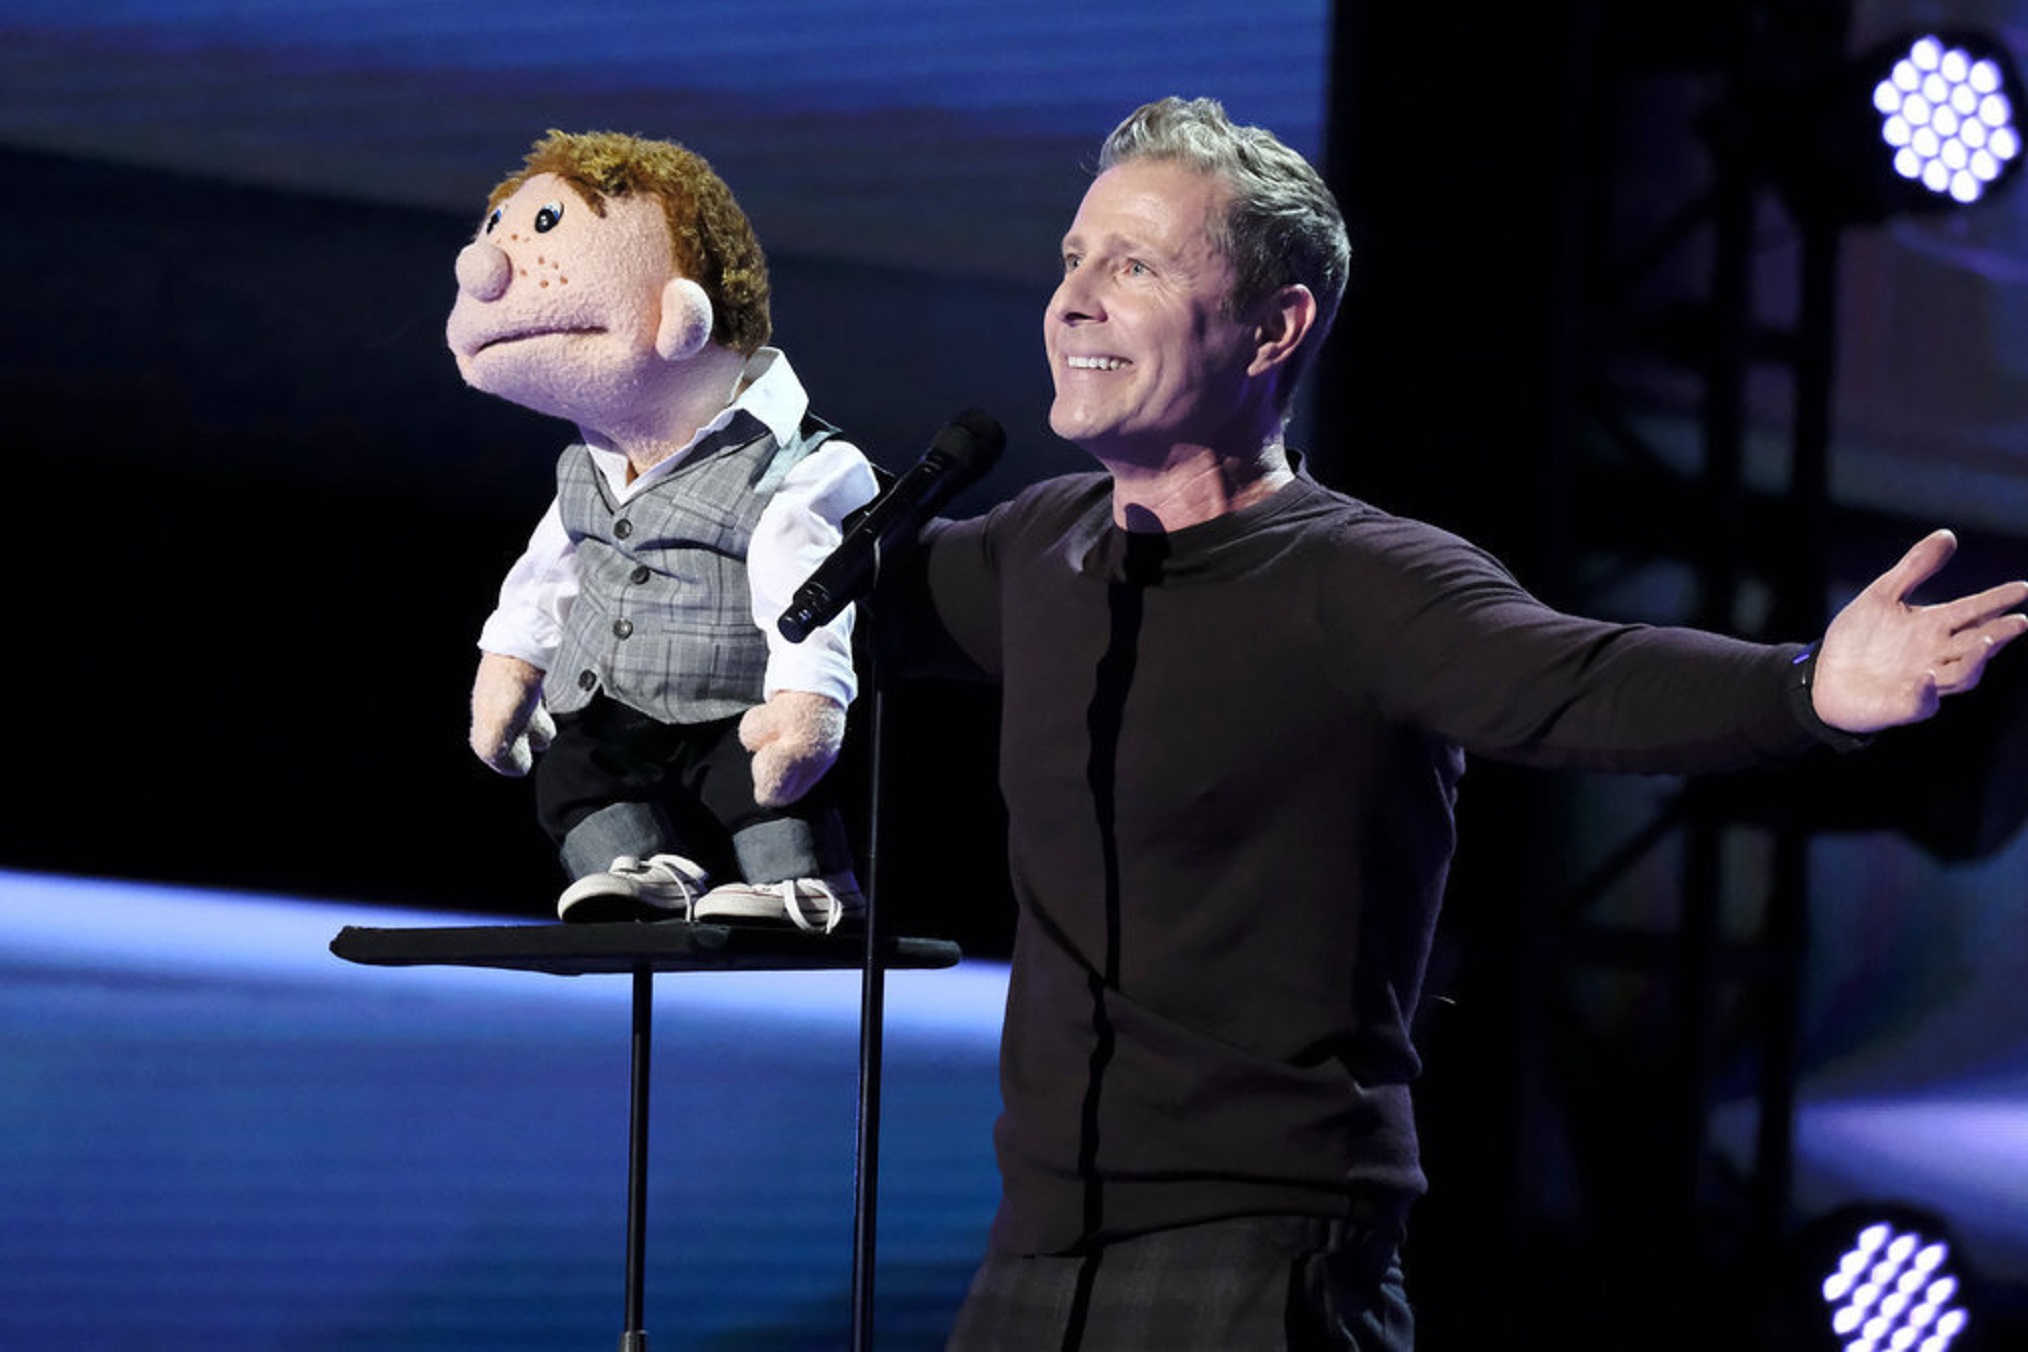 'AGT The Champions' Ventriloquist Paul Zerdin Returns to Bring the